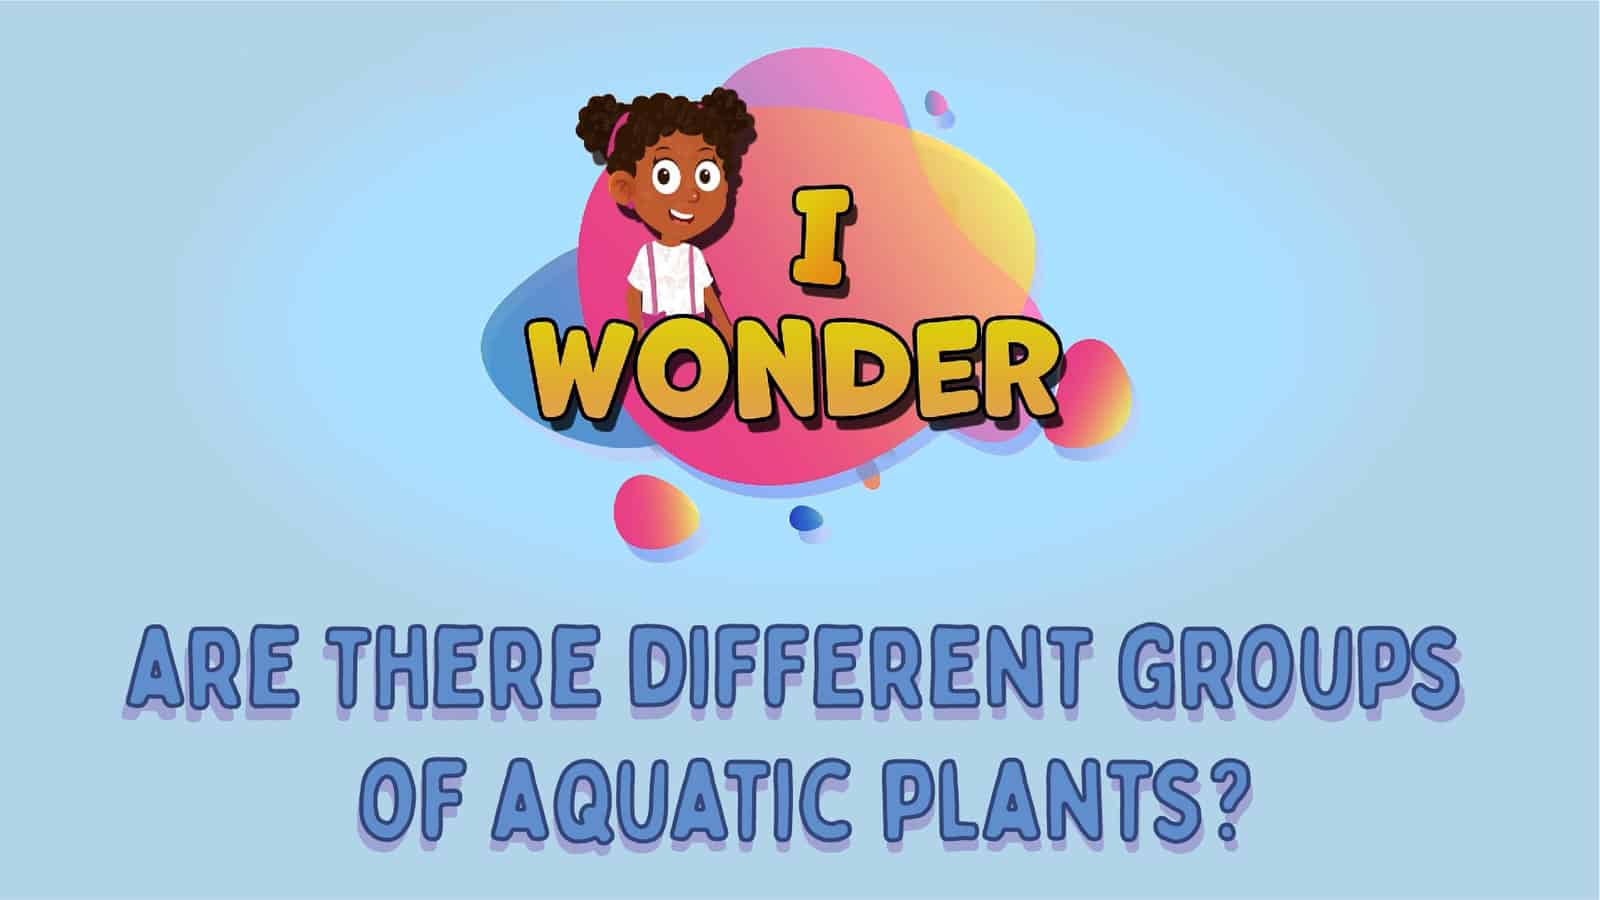 Are There Different Groups Of Aquatic Plants?